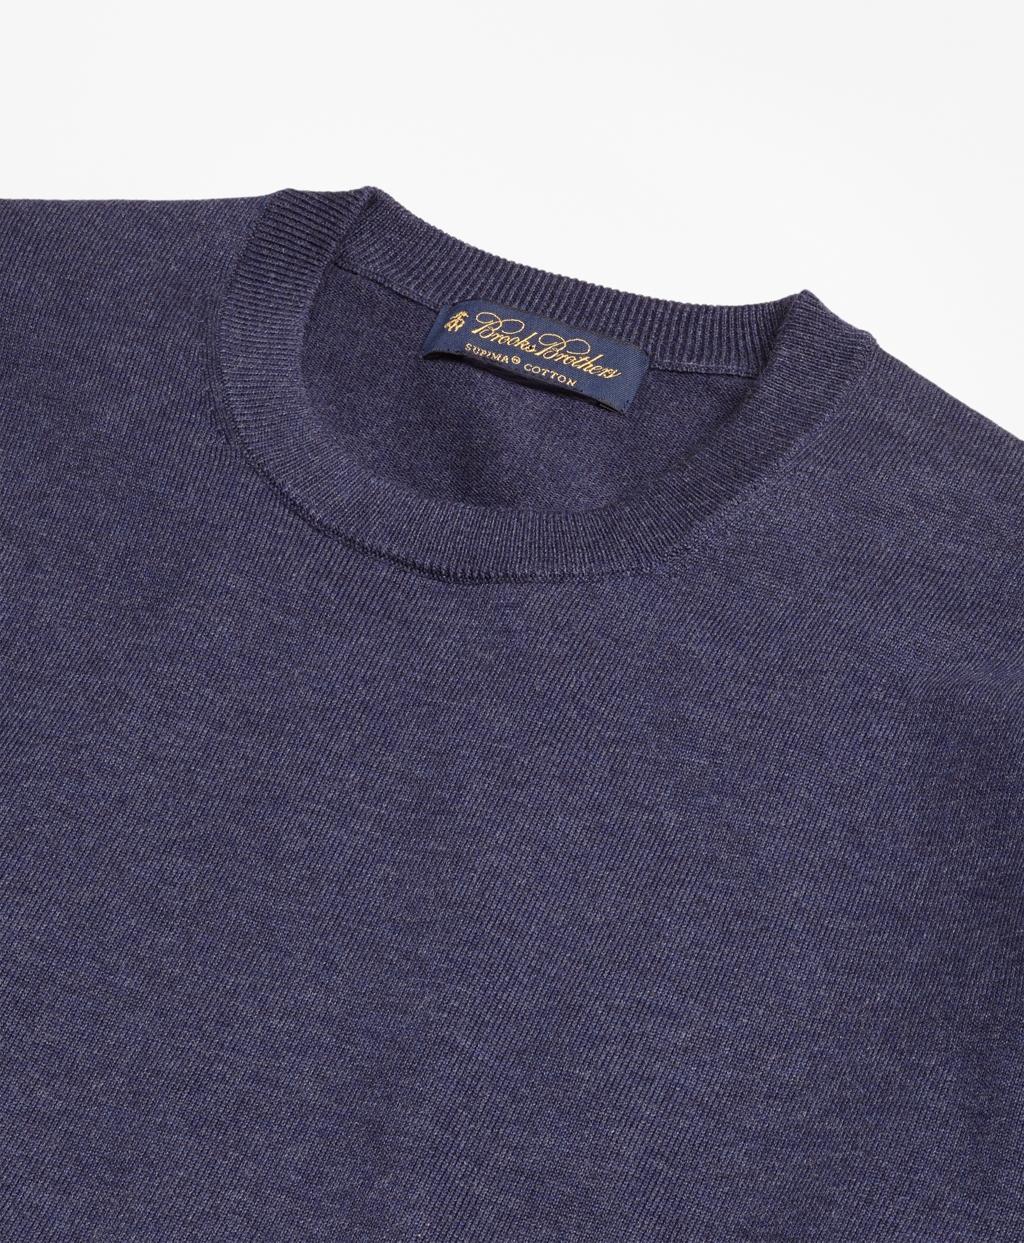 Lyst - Brooks Brothers Supima® Cotton Crewneck Sweater in Blue for Men